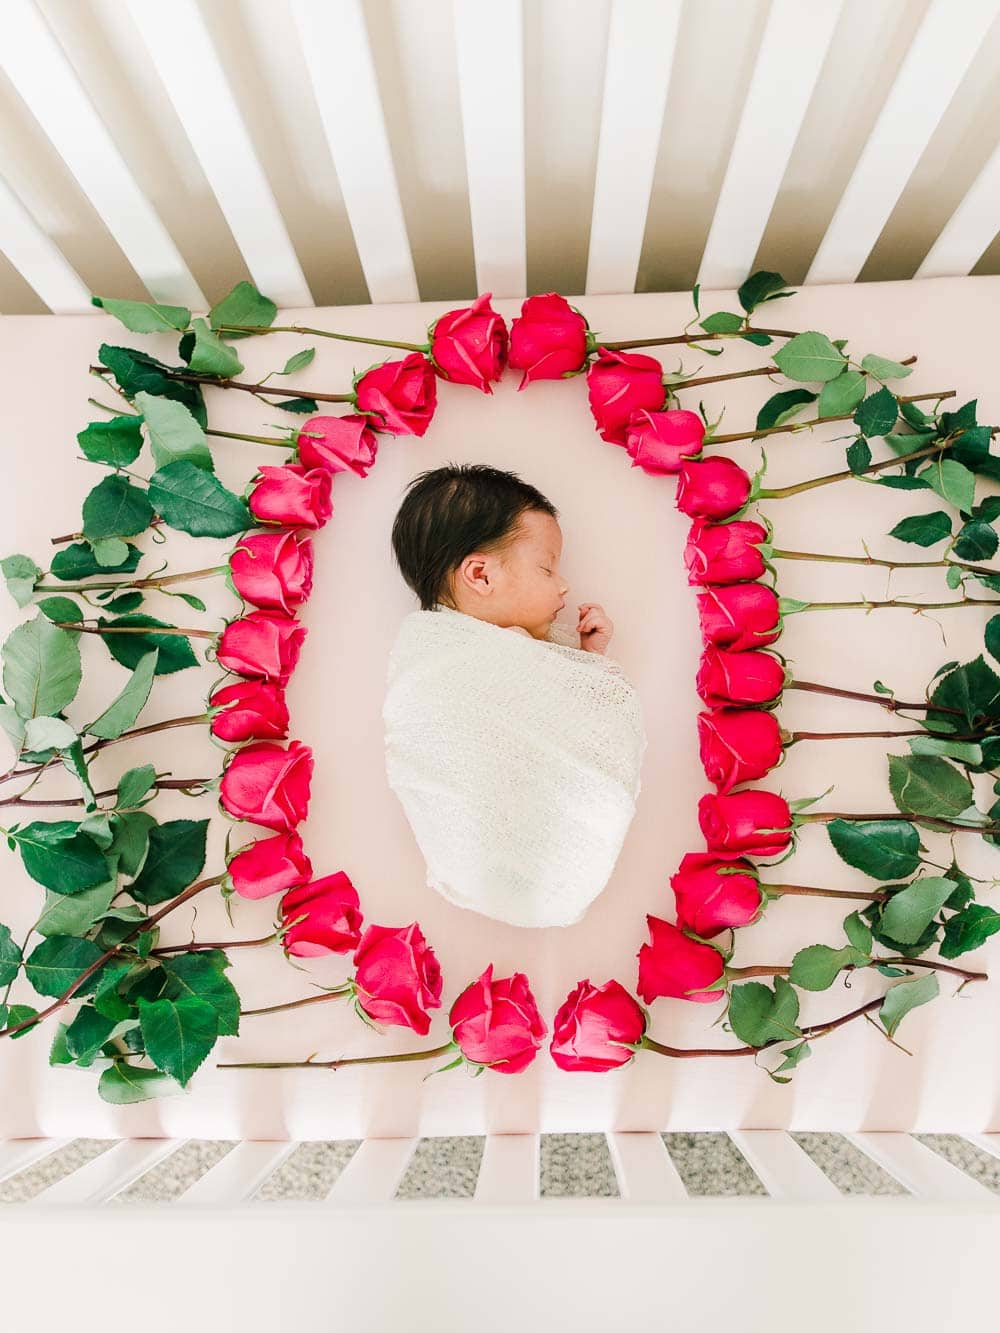 Newborn baby girl surrounded with flowers, Cleveland Newborn Photography, In-home newborn photography photo inspiration by Juliana Kaderbek Photography